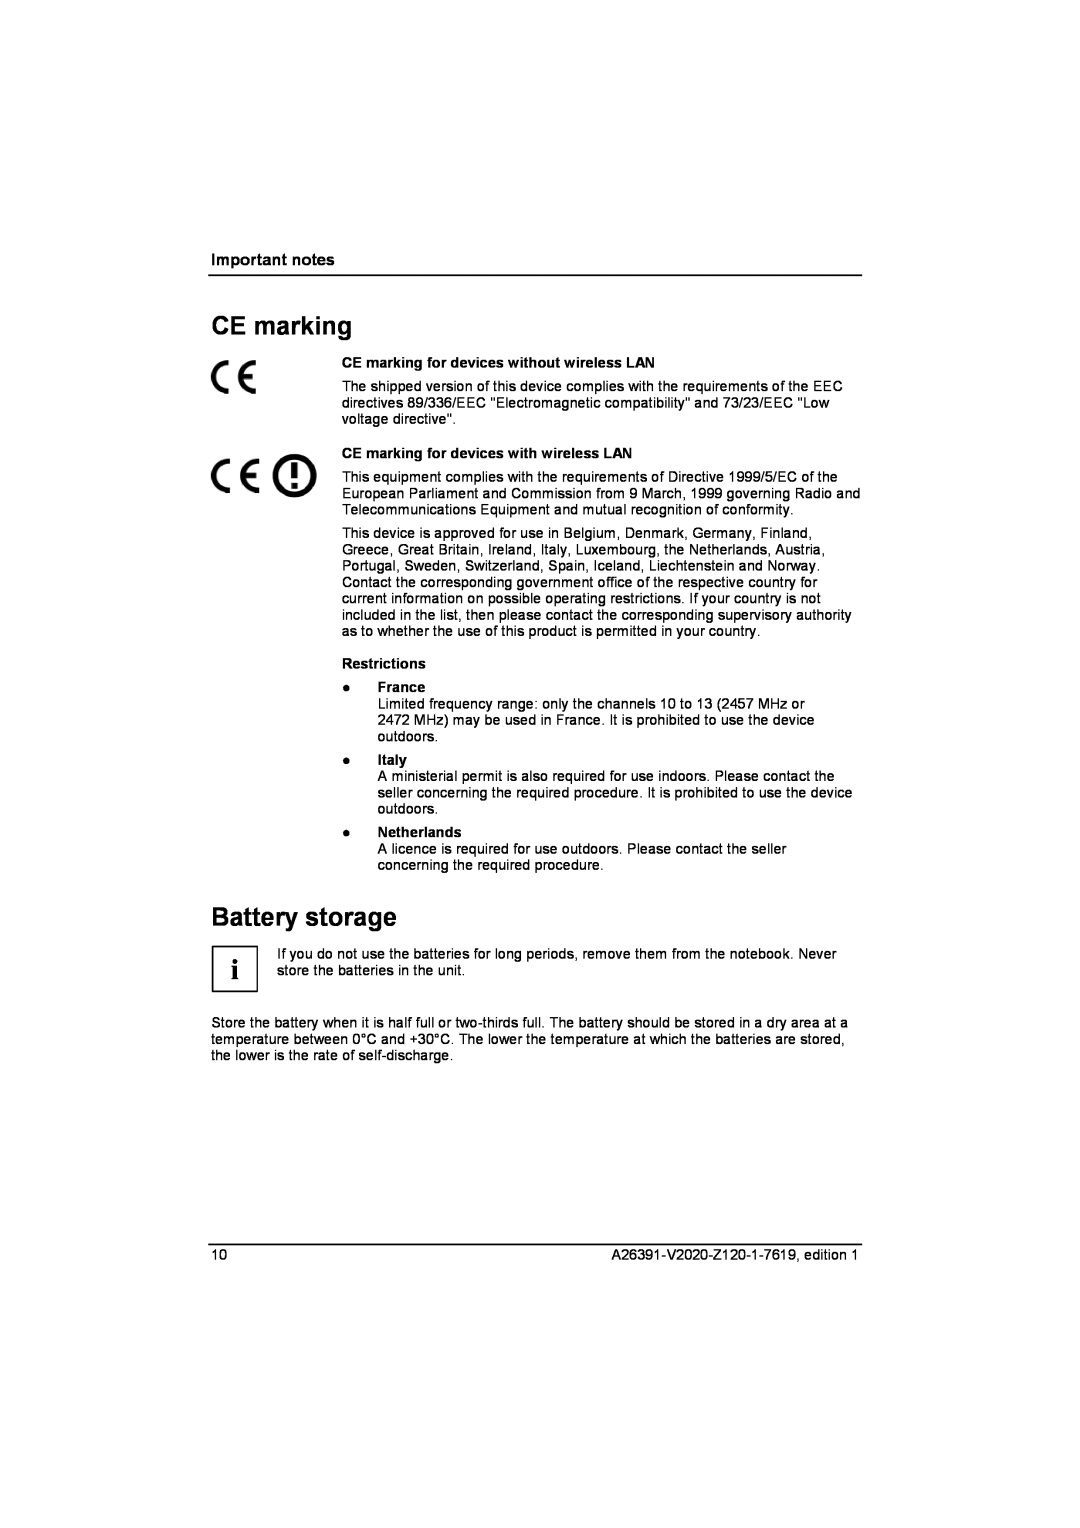 Fujitsu Siemens Computers V2020 Battery storage, CE marking for devices without wireless LAN, Restrictions France 